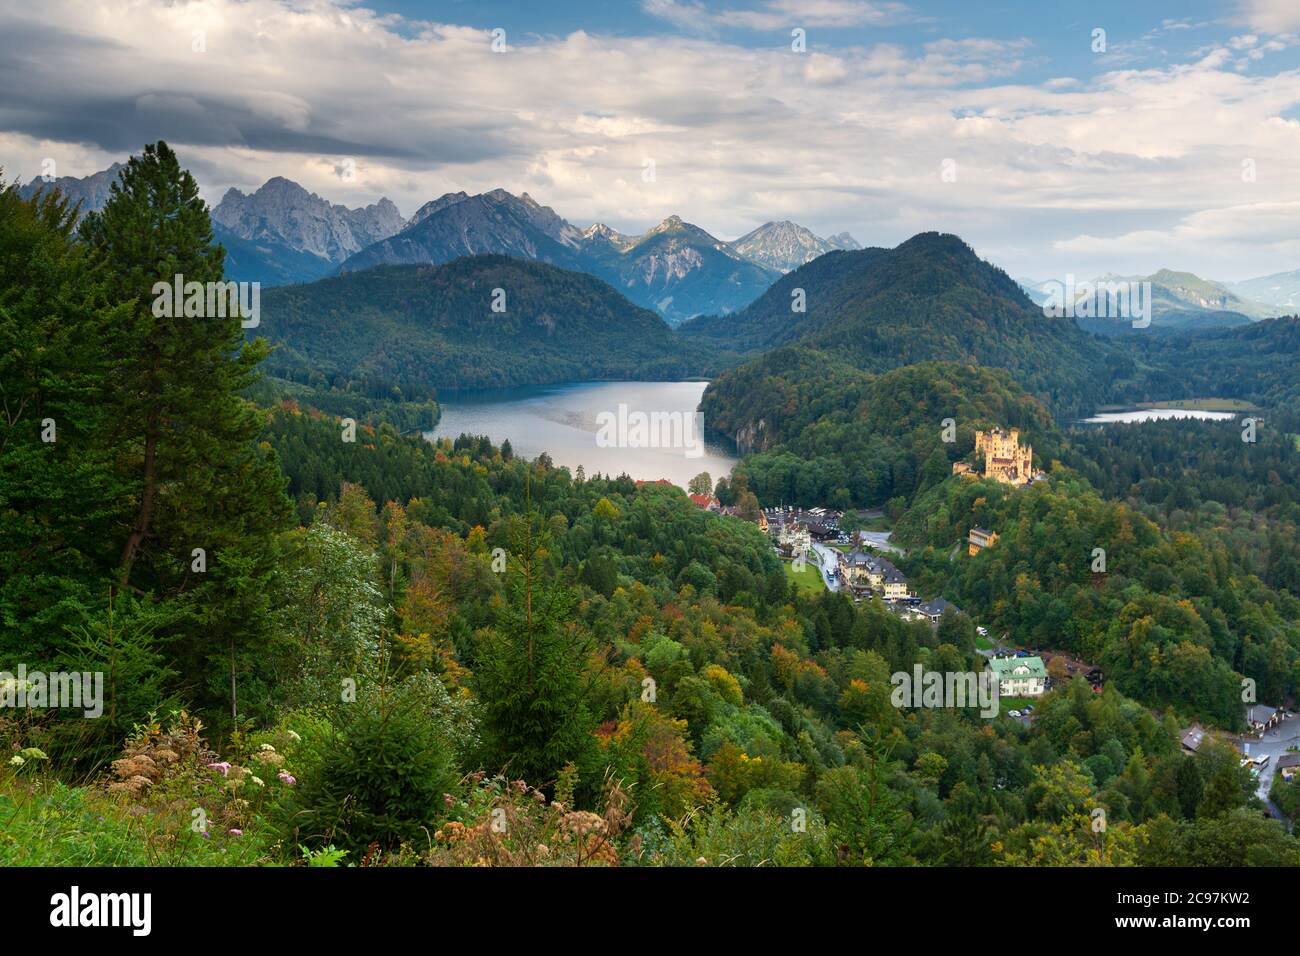 Bavarian Alps of Germany at Hohenschwangau Village and Lake Alpsee in the afternoon. Stock Photo